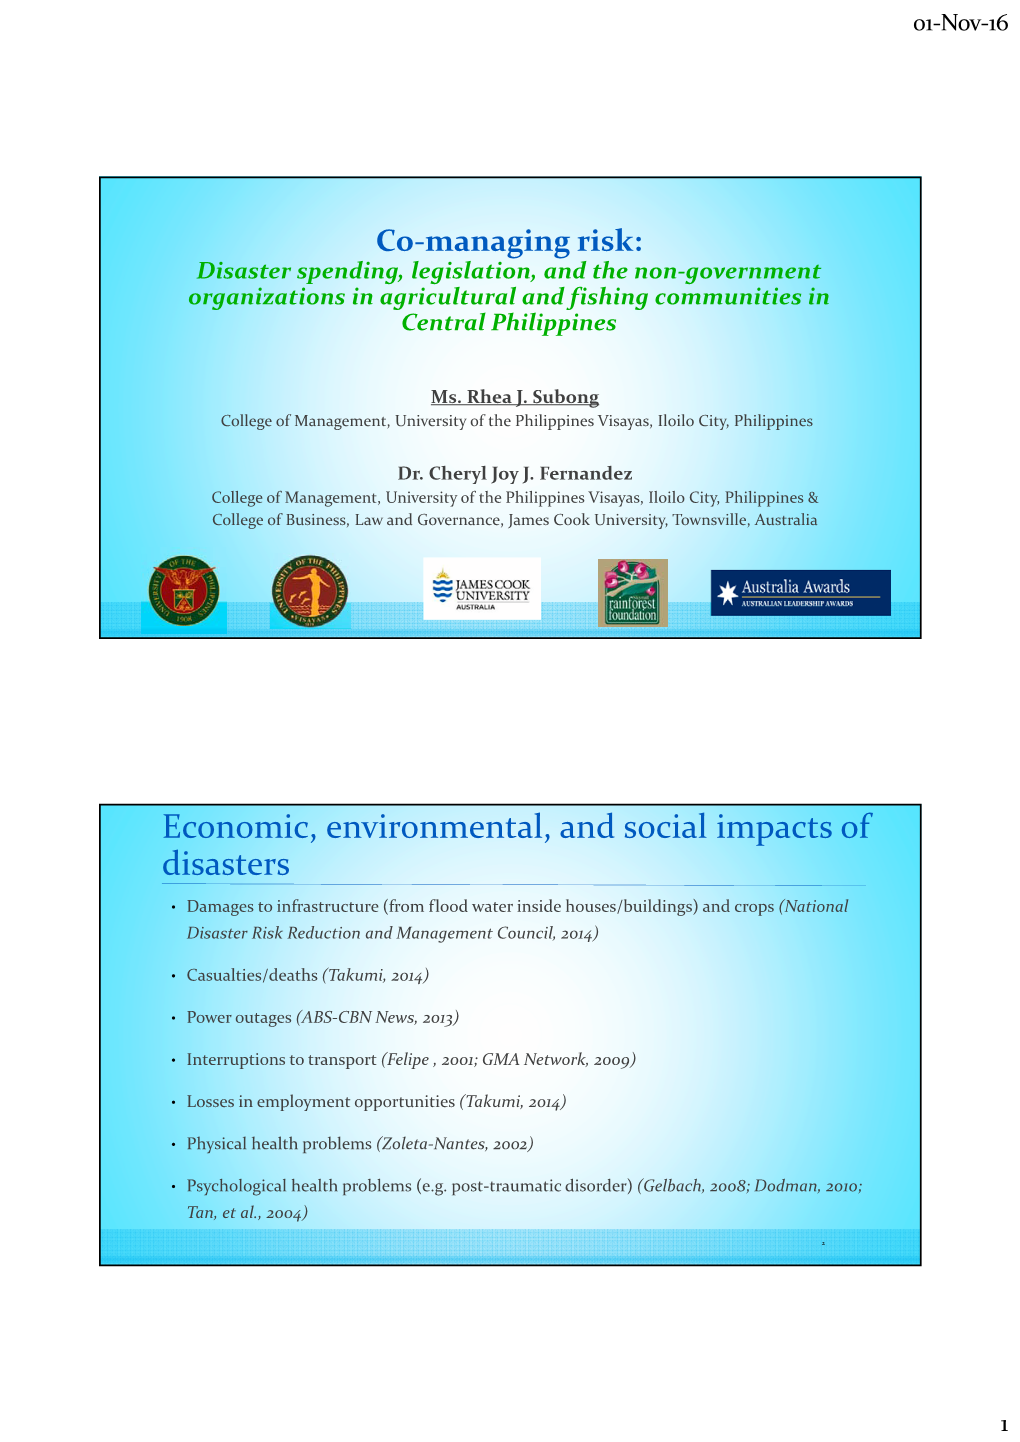 Economic, Environmental, and Social Impacts of Disasters